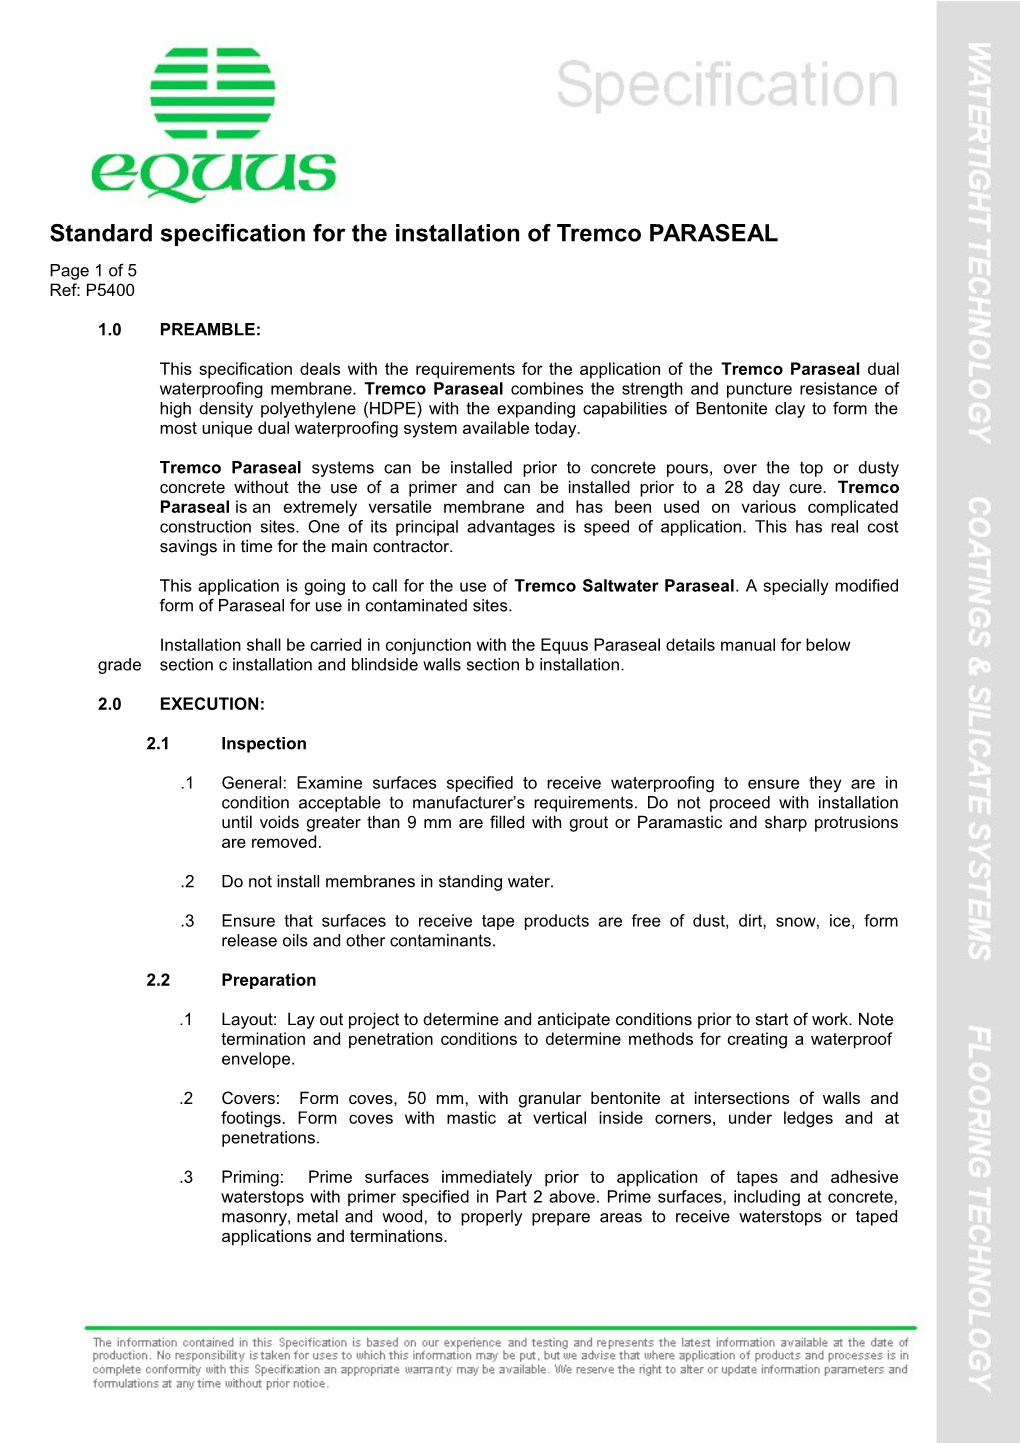 Standard Specification for the Installation of Tremco PARASEAL